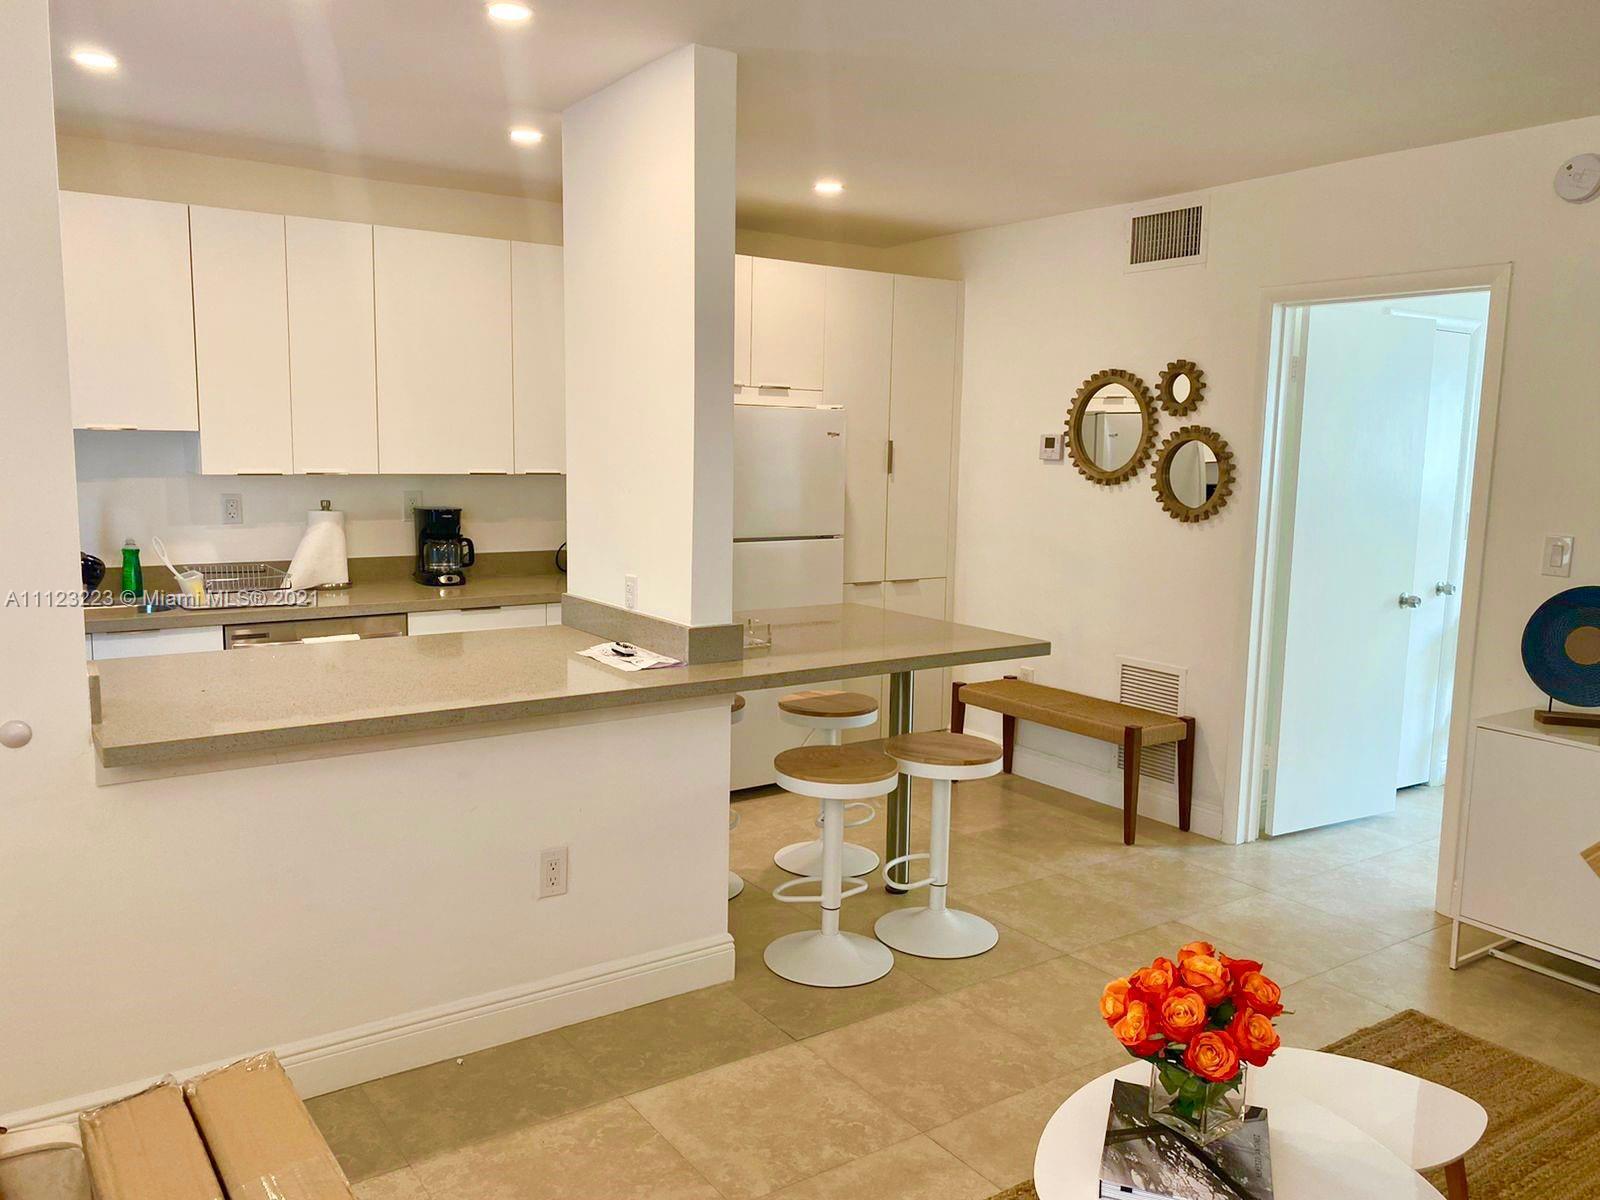 $1,200/WEEK - $4,300/MONTH - $3,900/YEARLY – ONE WEEK MINIMUM RENTAL – TOTALLY RENOVATED apartment 1 bed and 1 bath, open kitchen, dining and living room with 2 sofa/bed, washer, dryer, and dishwasher in unit. KEY/FOB with access to Key Biscayne Beach Park. Small boutique building with pool and BBQ area. Walking distance to the beach, this area is unique and exclusive family-oriented town. Sunrise Club Condo is in the Village of Key Biscayne, Florida in front of the Winn-Dixie and Restaurants. This Condo is minutes away from the Brickell area, Downtown Miami, Coral Gables and Coconut Grove. We are waiting for you!!